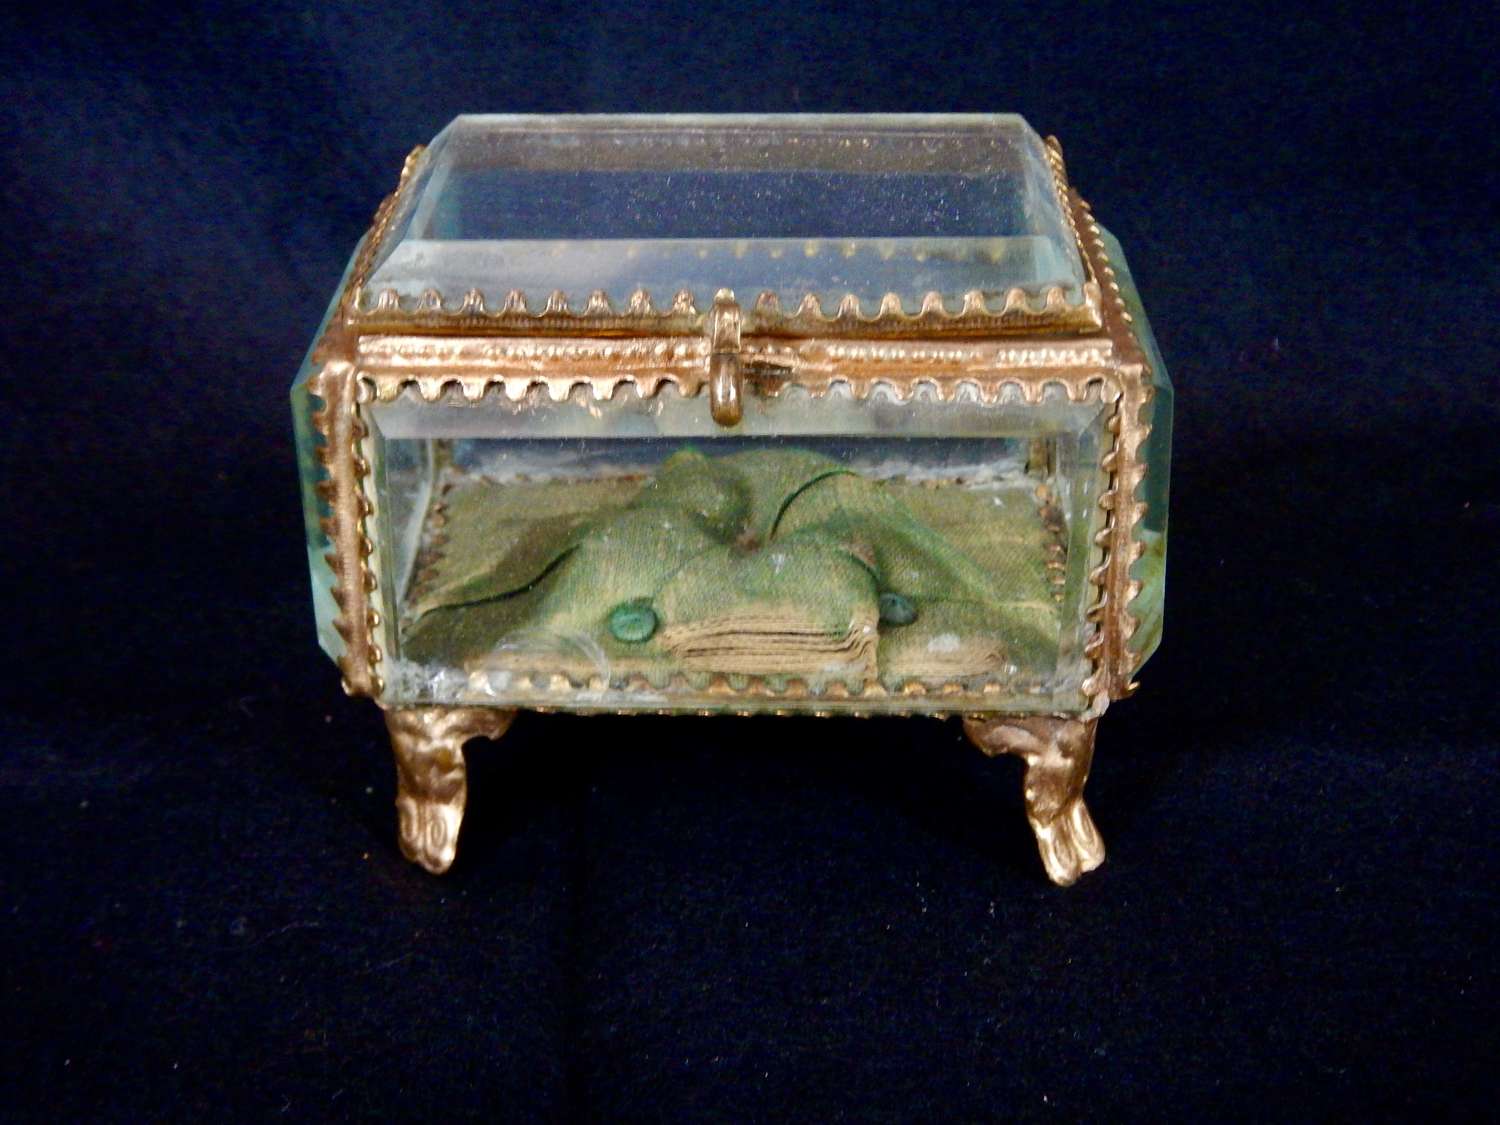 Antique French Bevelled Glass Jewellery Box - French Jewellery Box